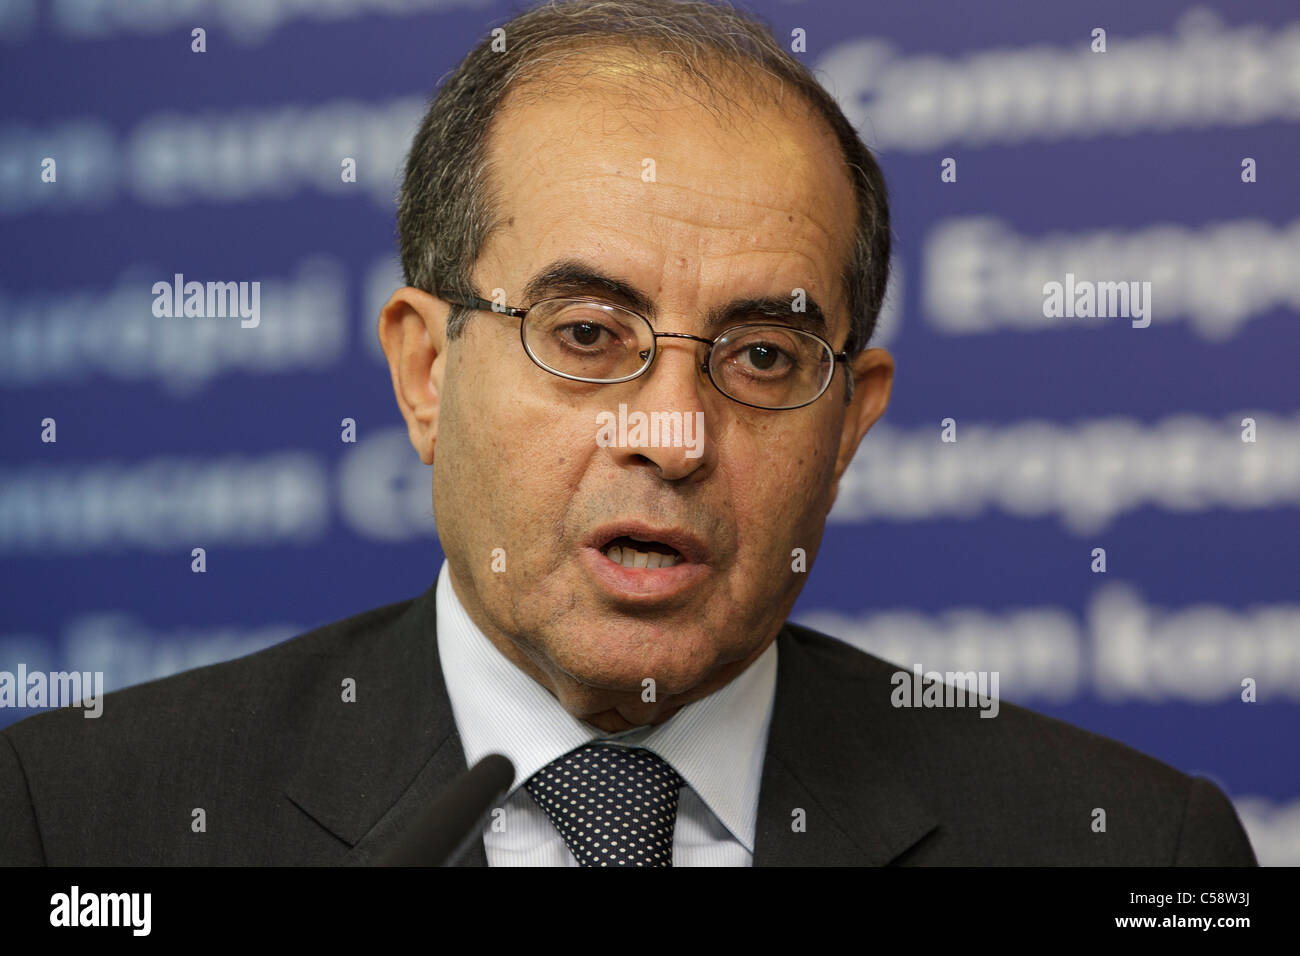 Mahmoud Jibril, Chairman, National Transitional Council of Libya, speaking at the European Commission in Brussels. Stock Photo